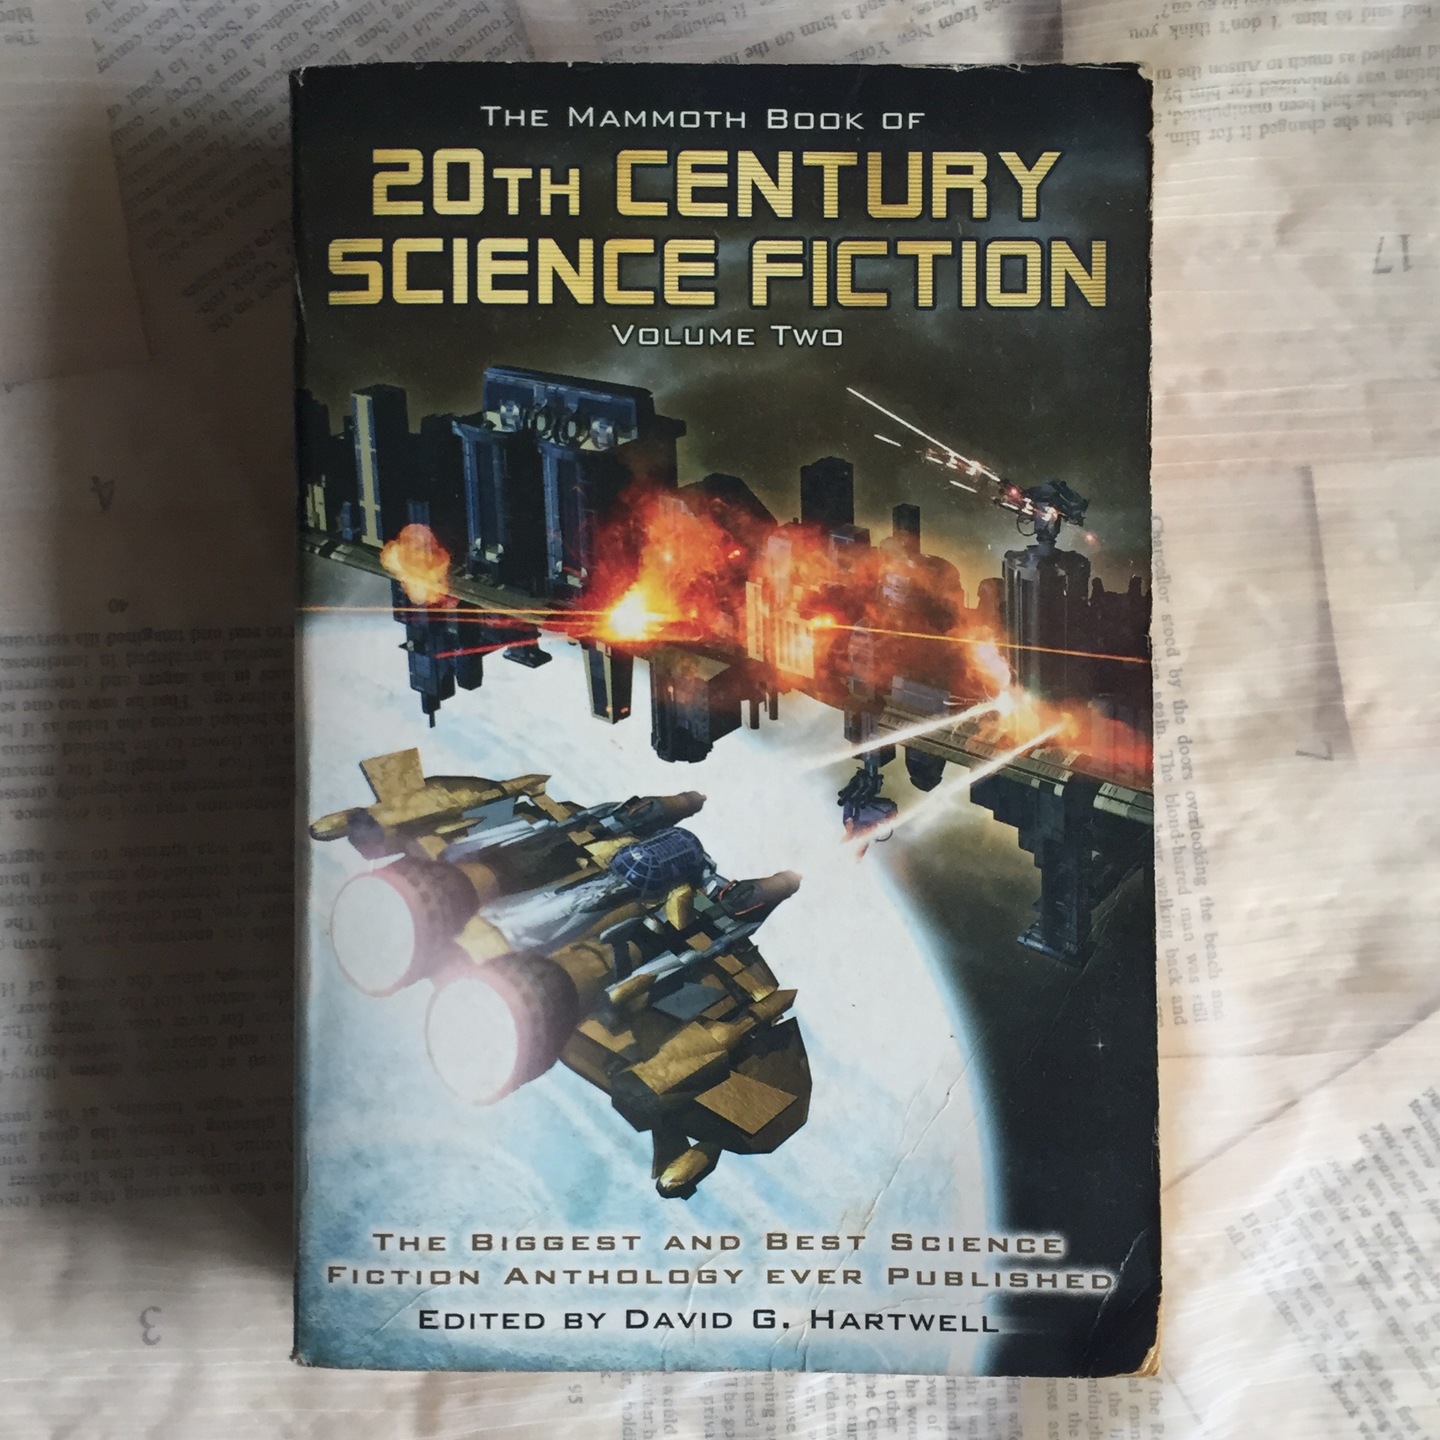 The Mammoth Book of 20th Century Science Fiction Volume 2 by David G. Hartwell [Paperback]